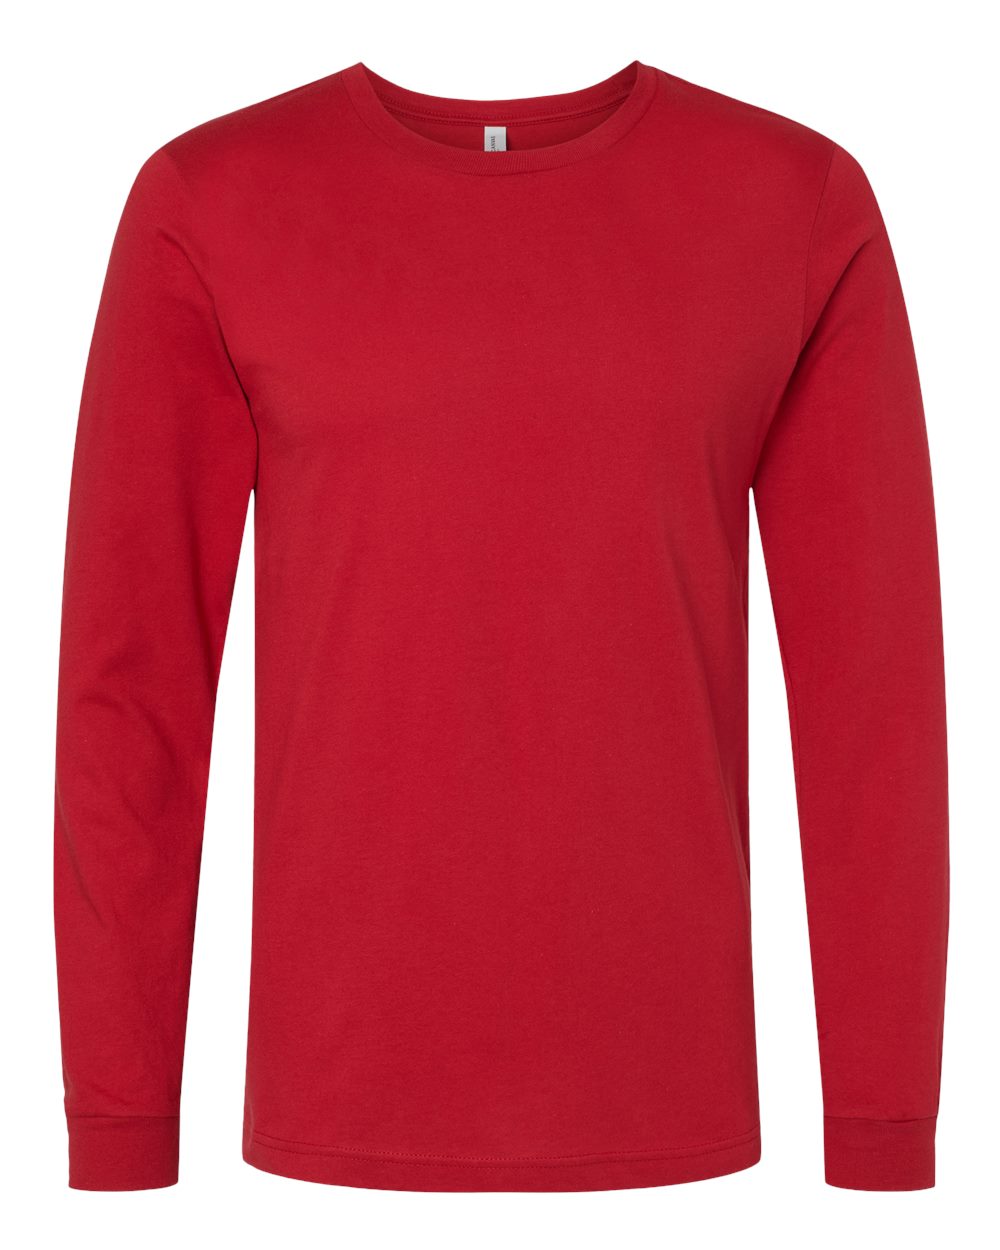 Bella + Canvas Long Sleeve (3501) in Canvas Red